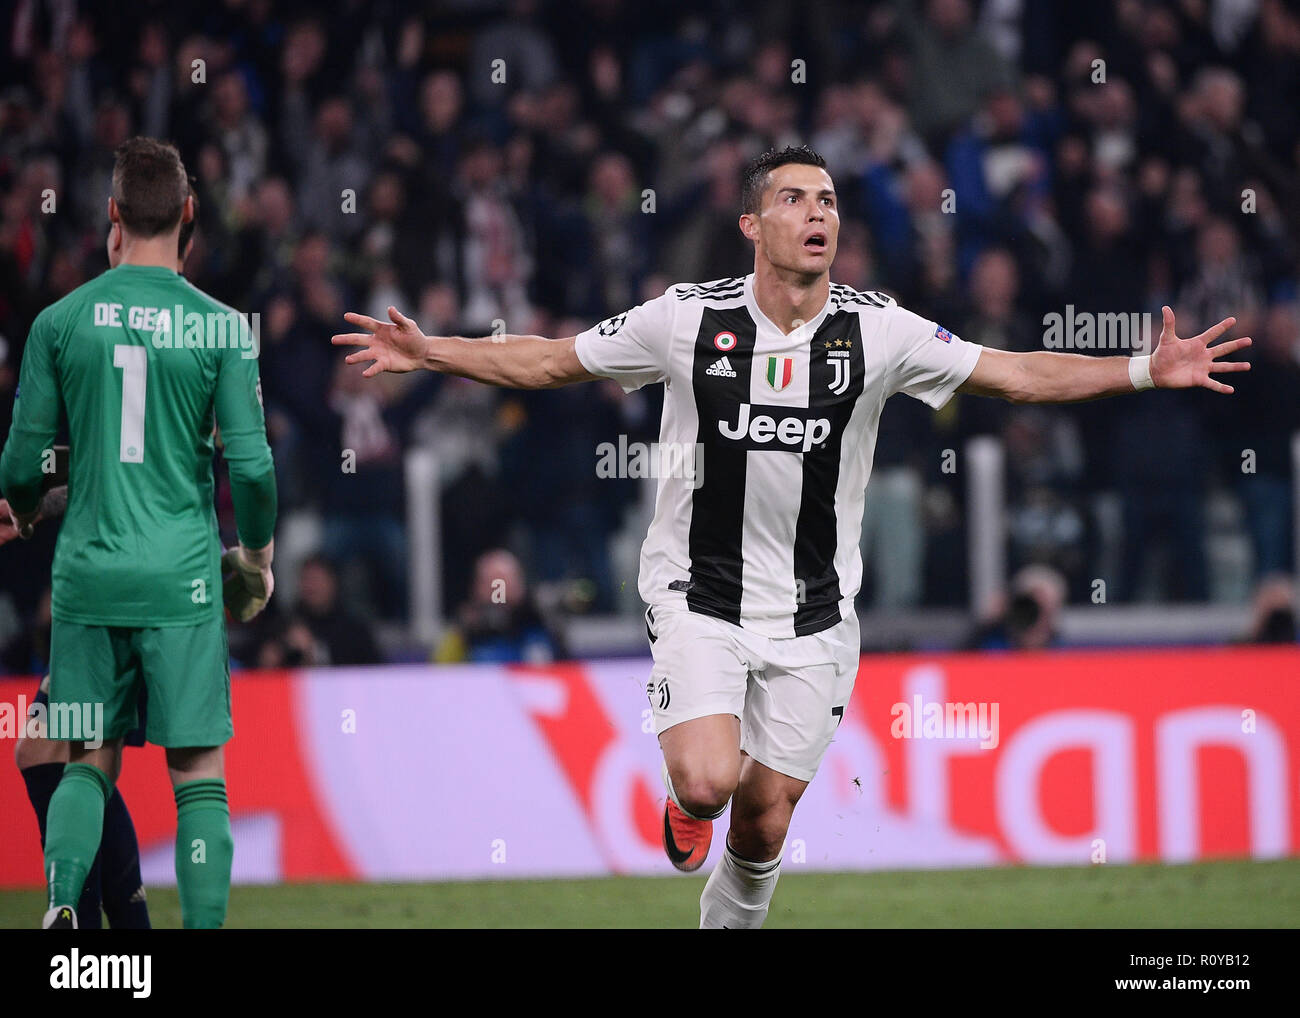 Rome, Italy. 7th Nov, 2018. Juventus's Cristiano Ronaldo celebrates scoring  during the UEFA Champions League Group H match between Juventus and  Manchester United in Turin, Italy, Nov. 7, 2018. Juventus lost 1-2.